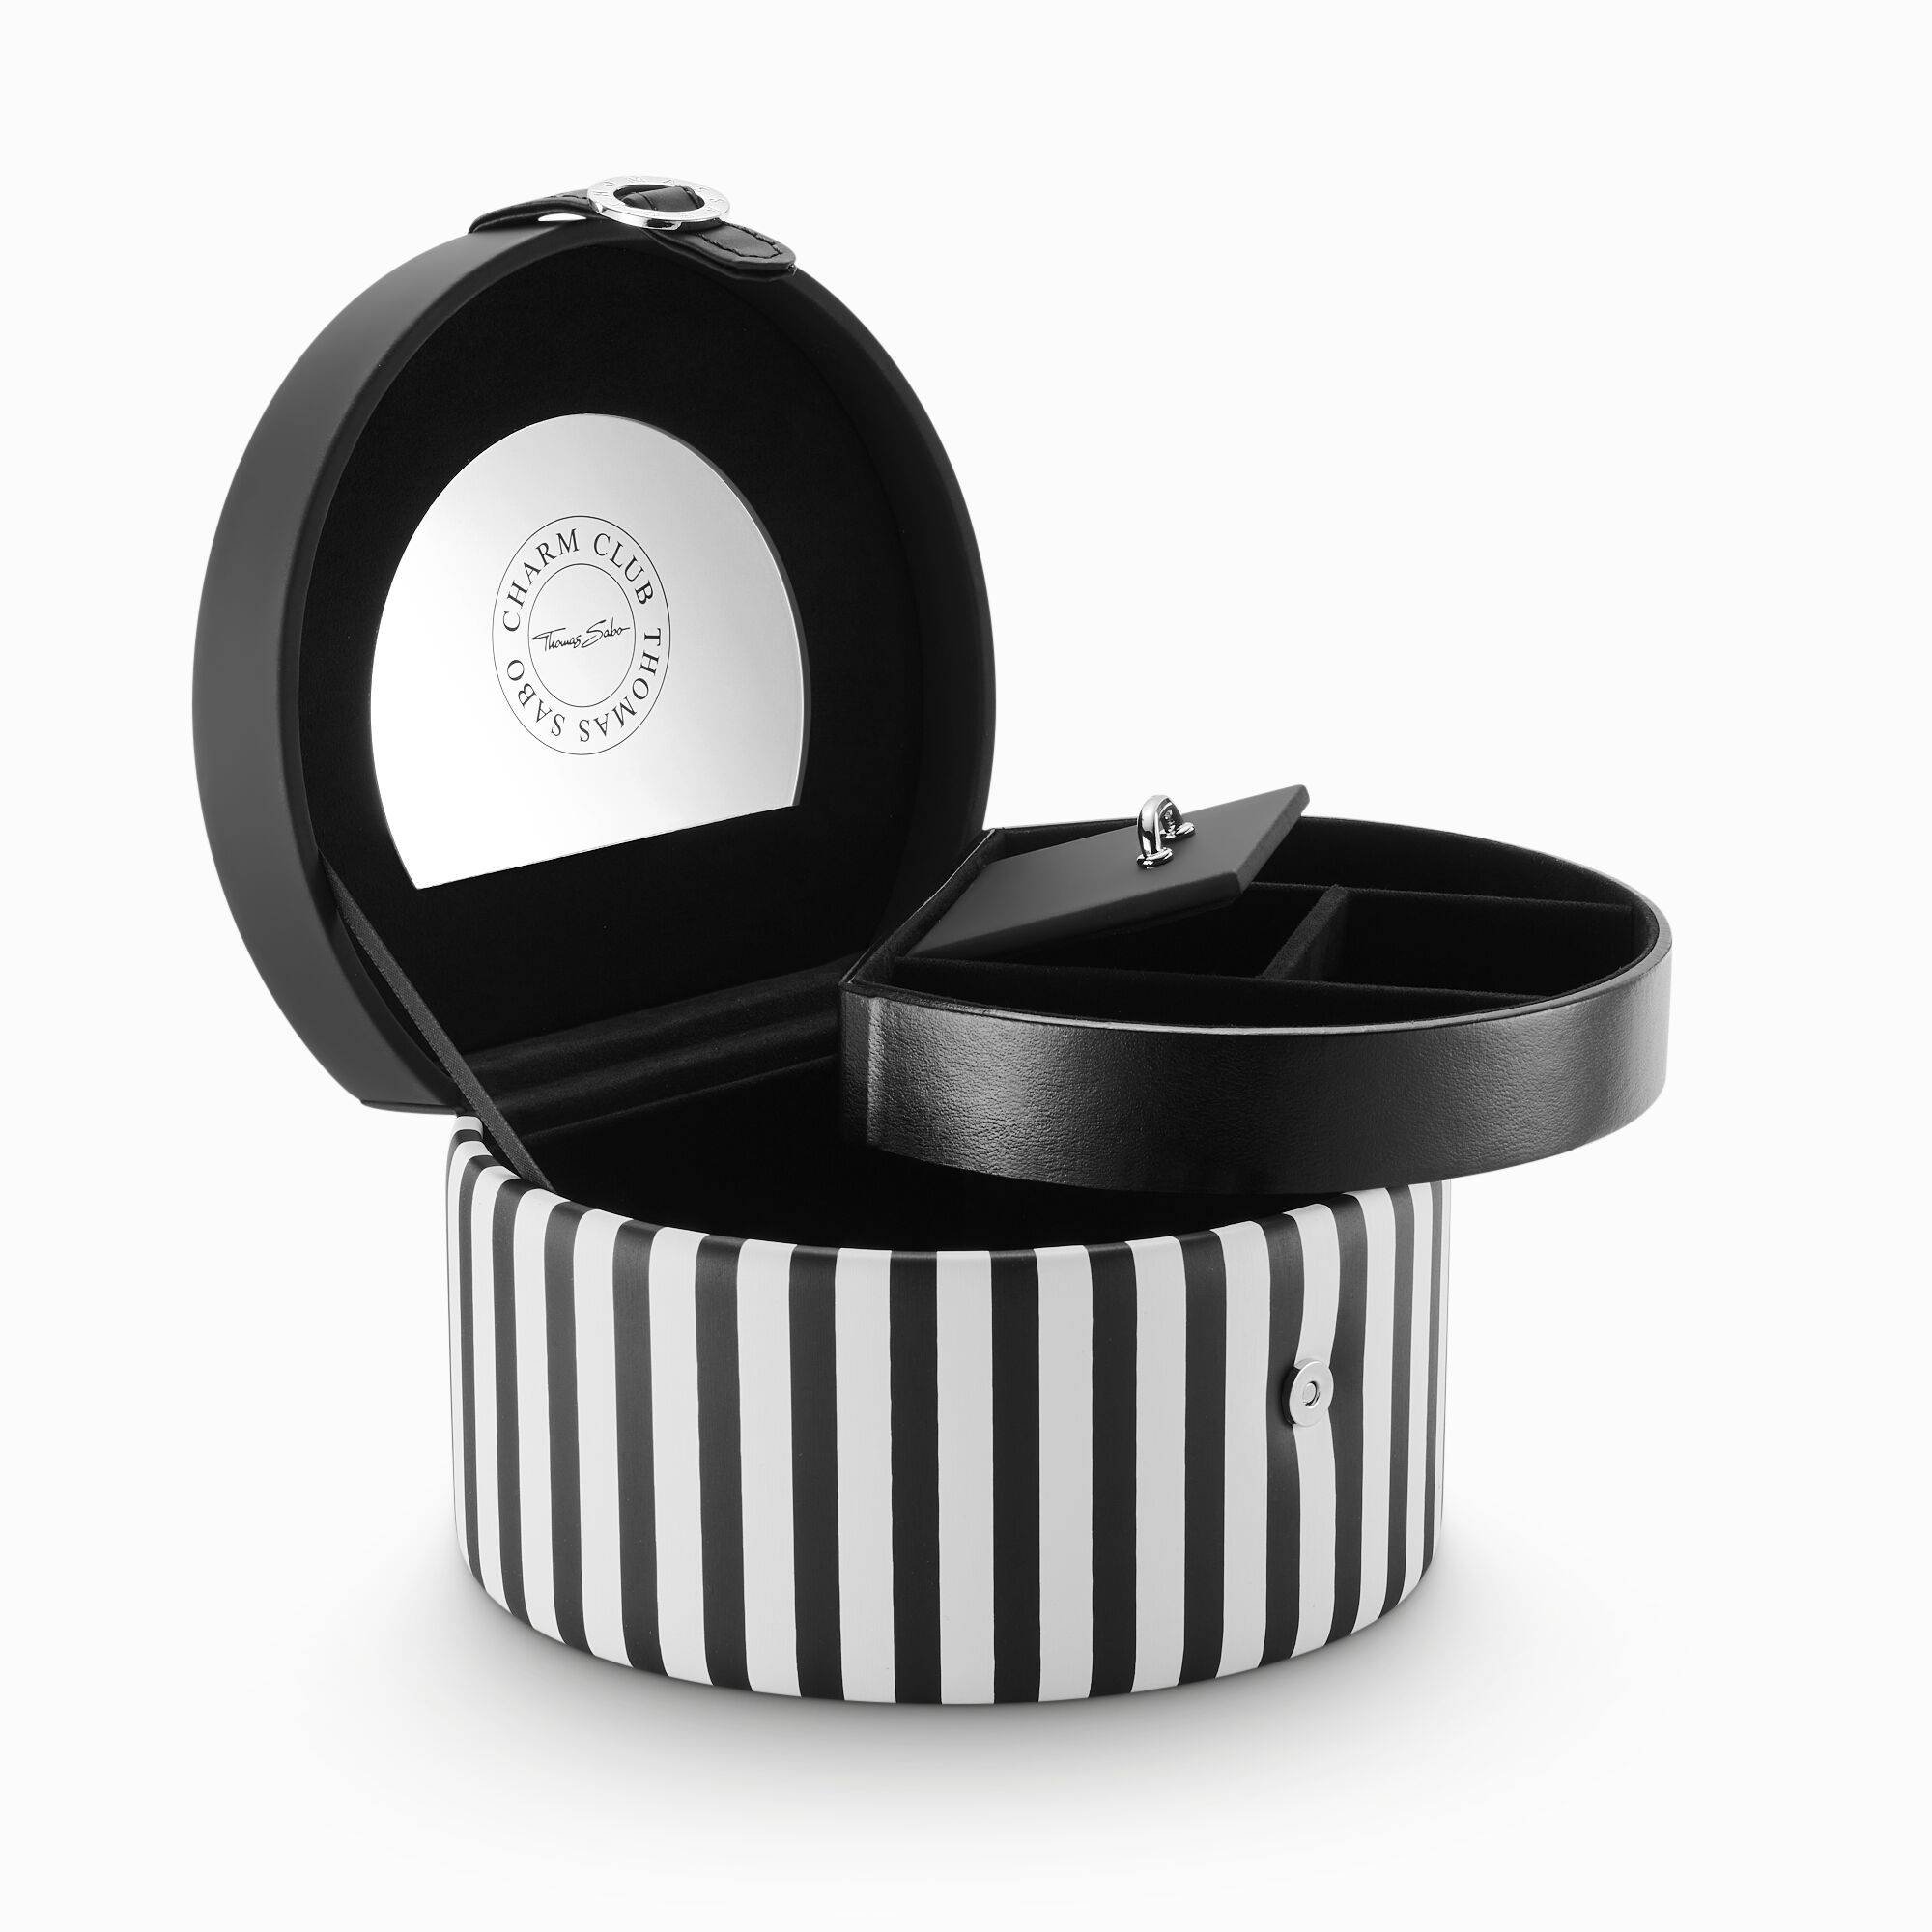 Charm Jewellery Box made of PU matribbon from the Charm Club collection in the THOMAS SABO online store